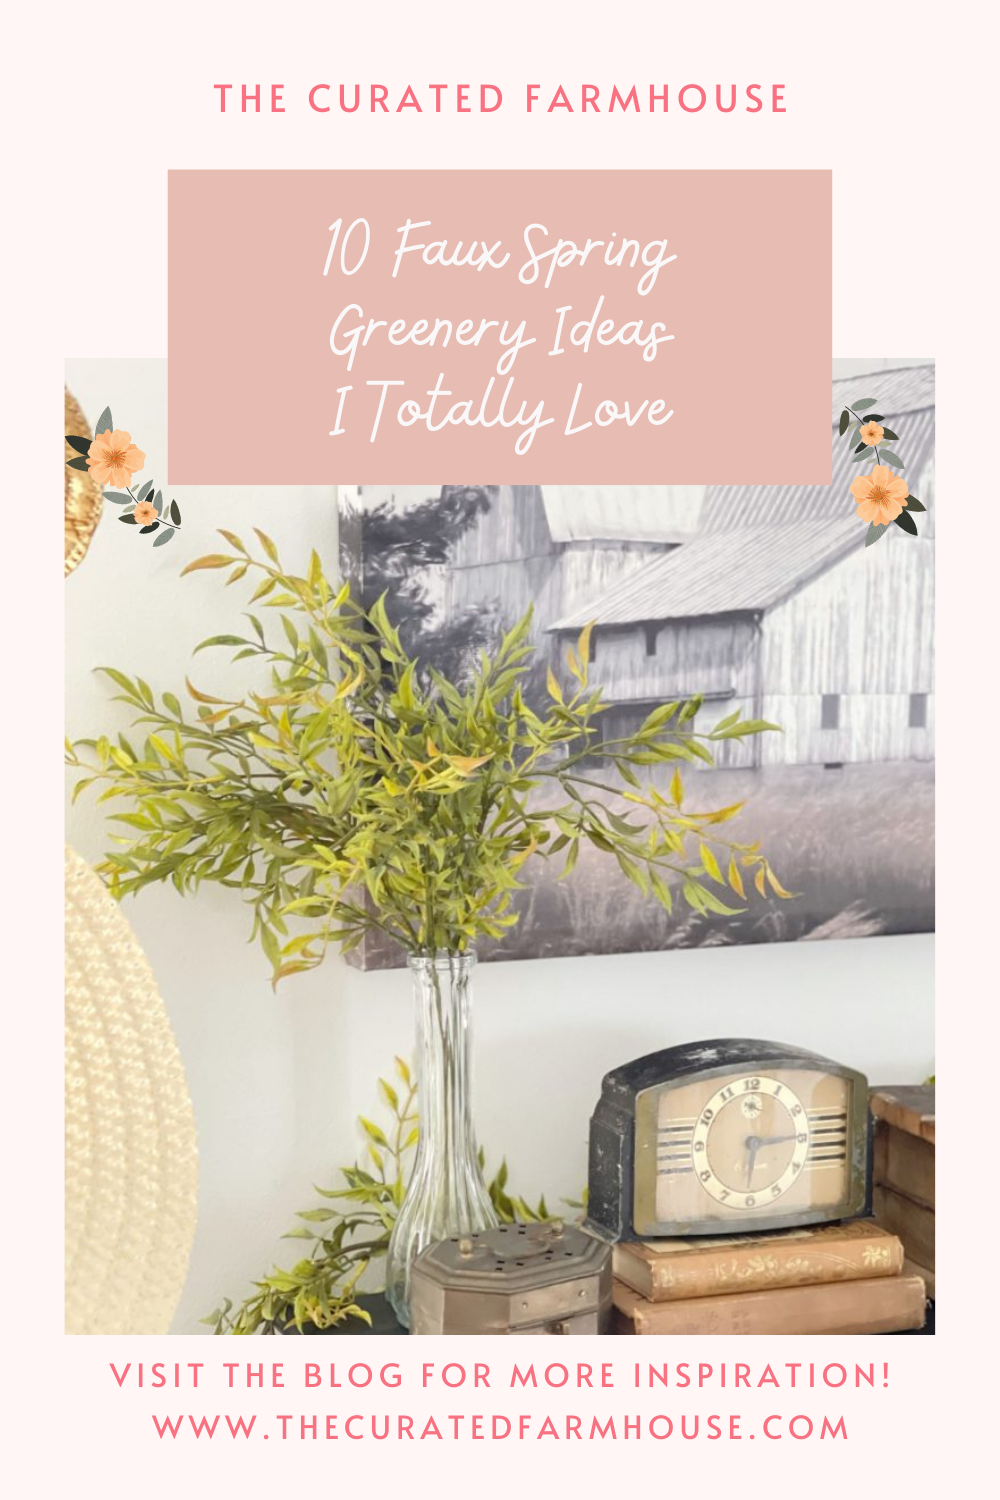 10 Faux Spring Greenery Ideas I Totally Love